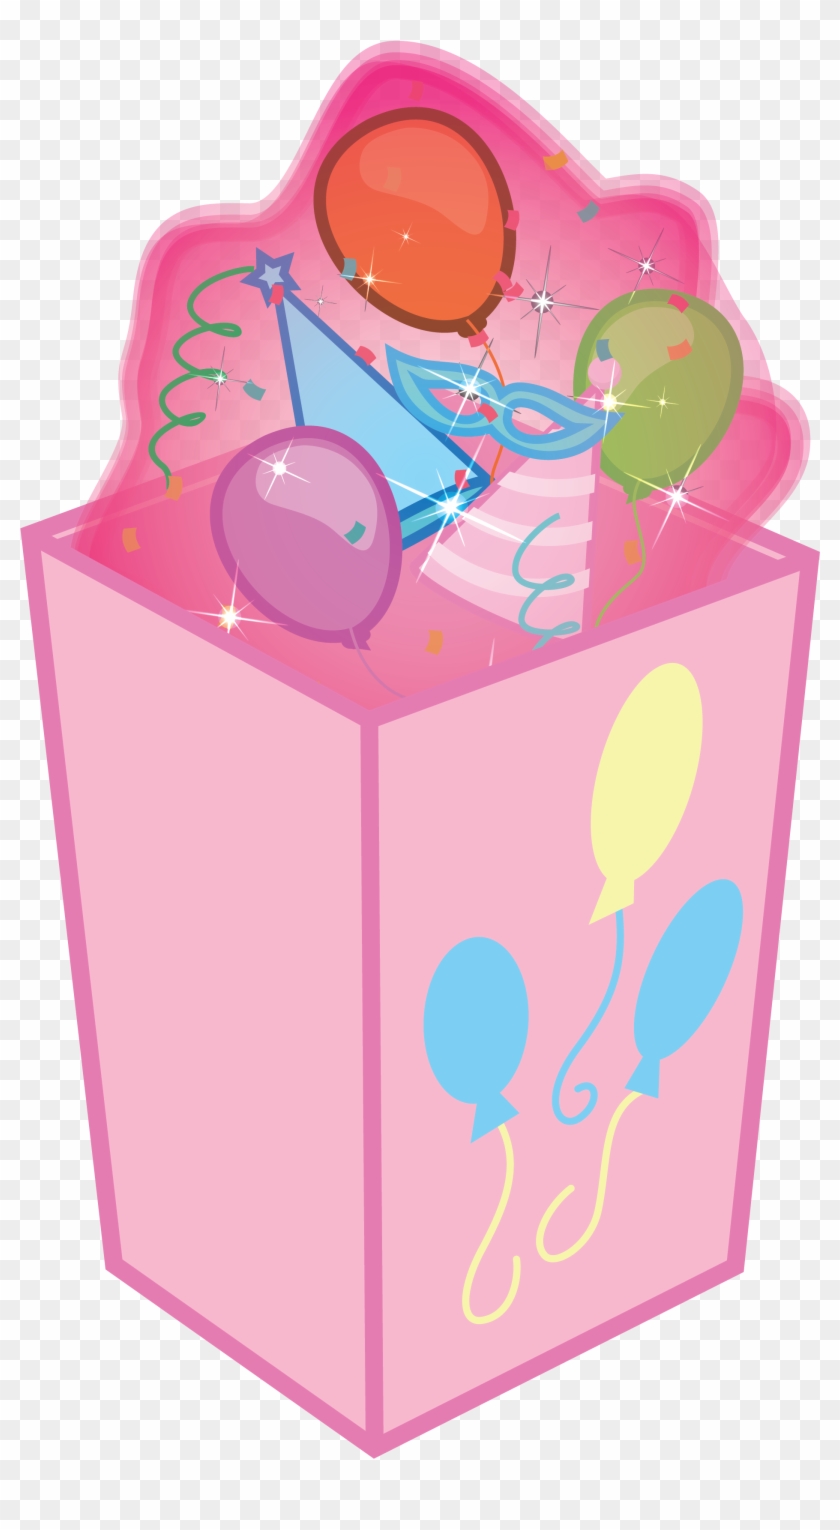 By Helping Pinkie Pie Support Birthday Dreams, You - By Helping Pinkie Pie Support Birthday Dreams, You #706561